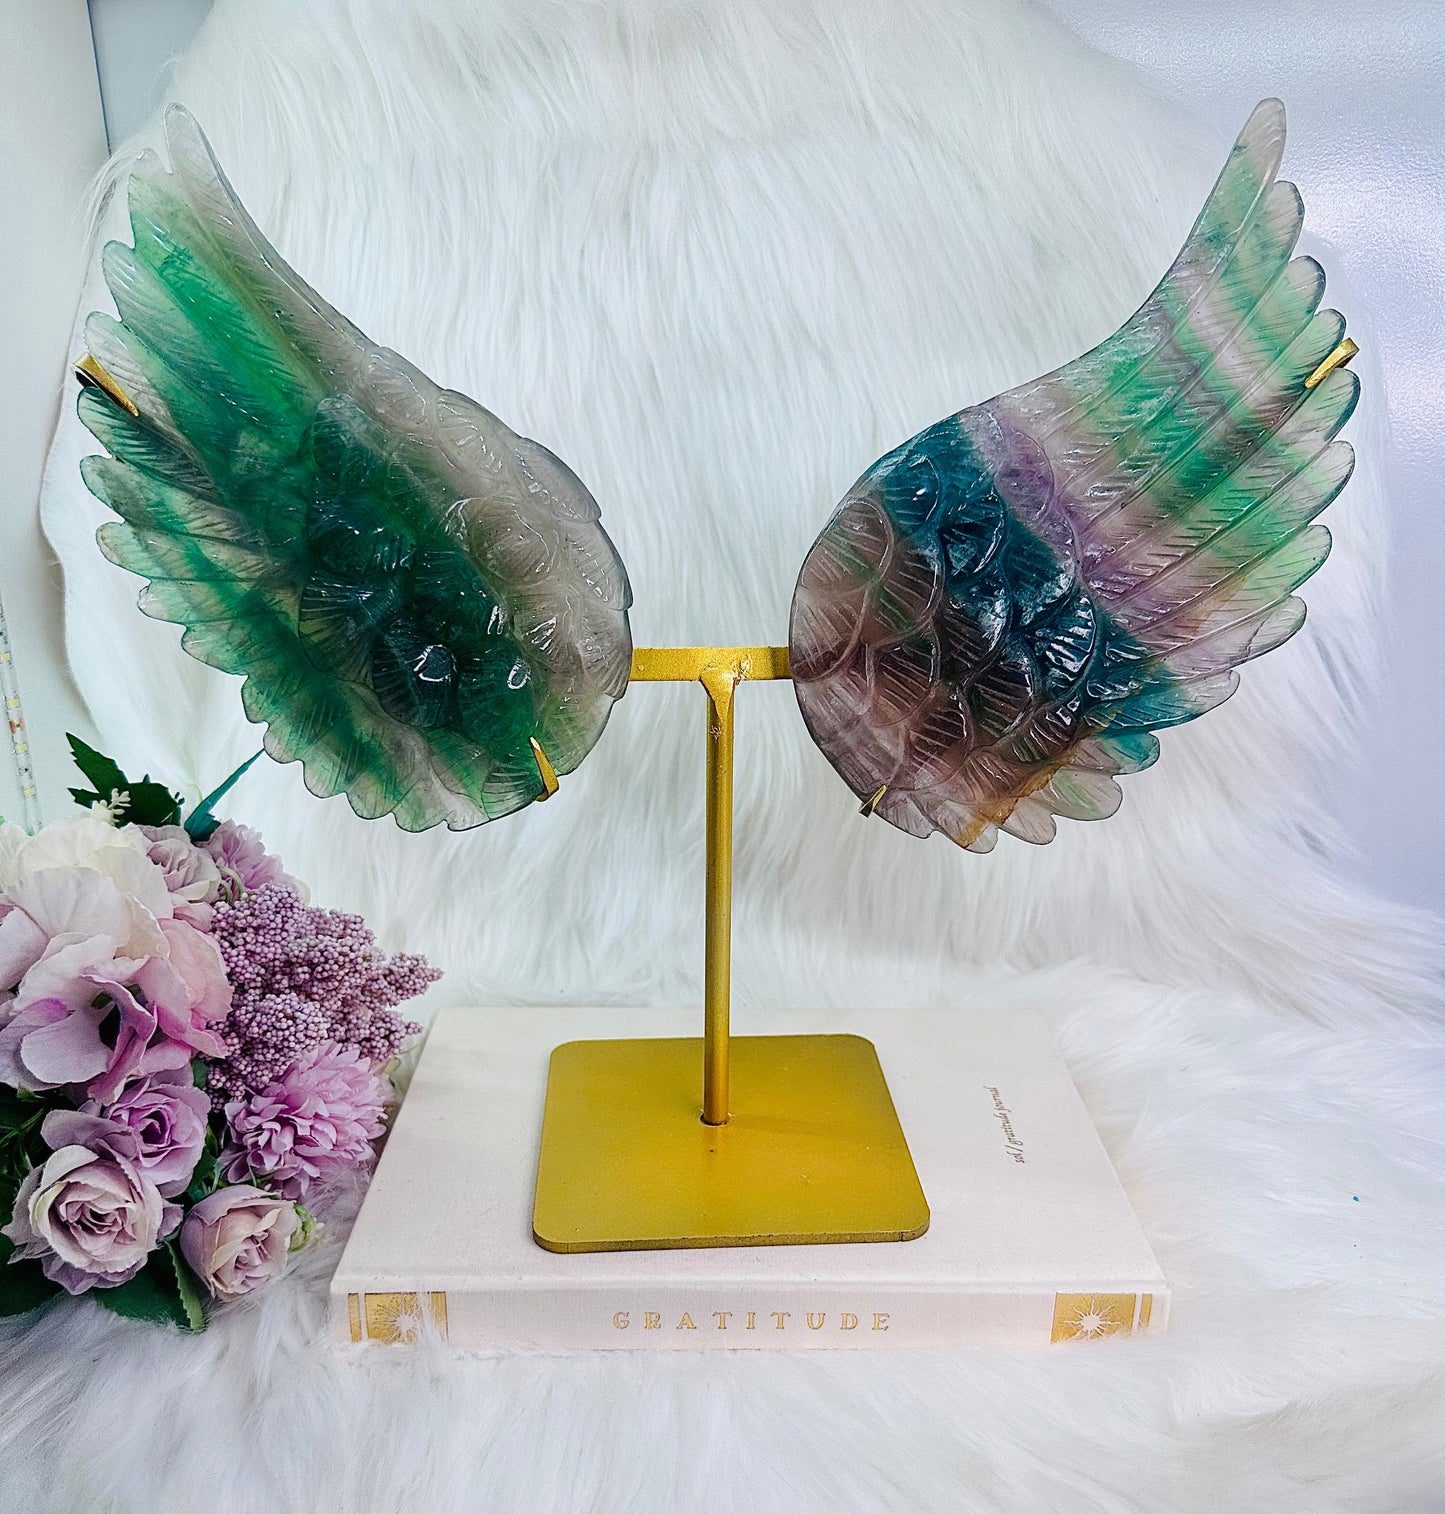 ⚜️ SALE ⚜️The Biggest Most Stunning Set of Rainbow Fluorite Angel Wings on Gold Stand From Brazil - The Wings Alone Weigh 1.49KG, The Set is 30cm High (inc stand) Absolute Statement Piece